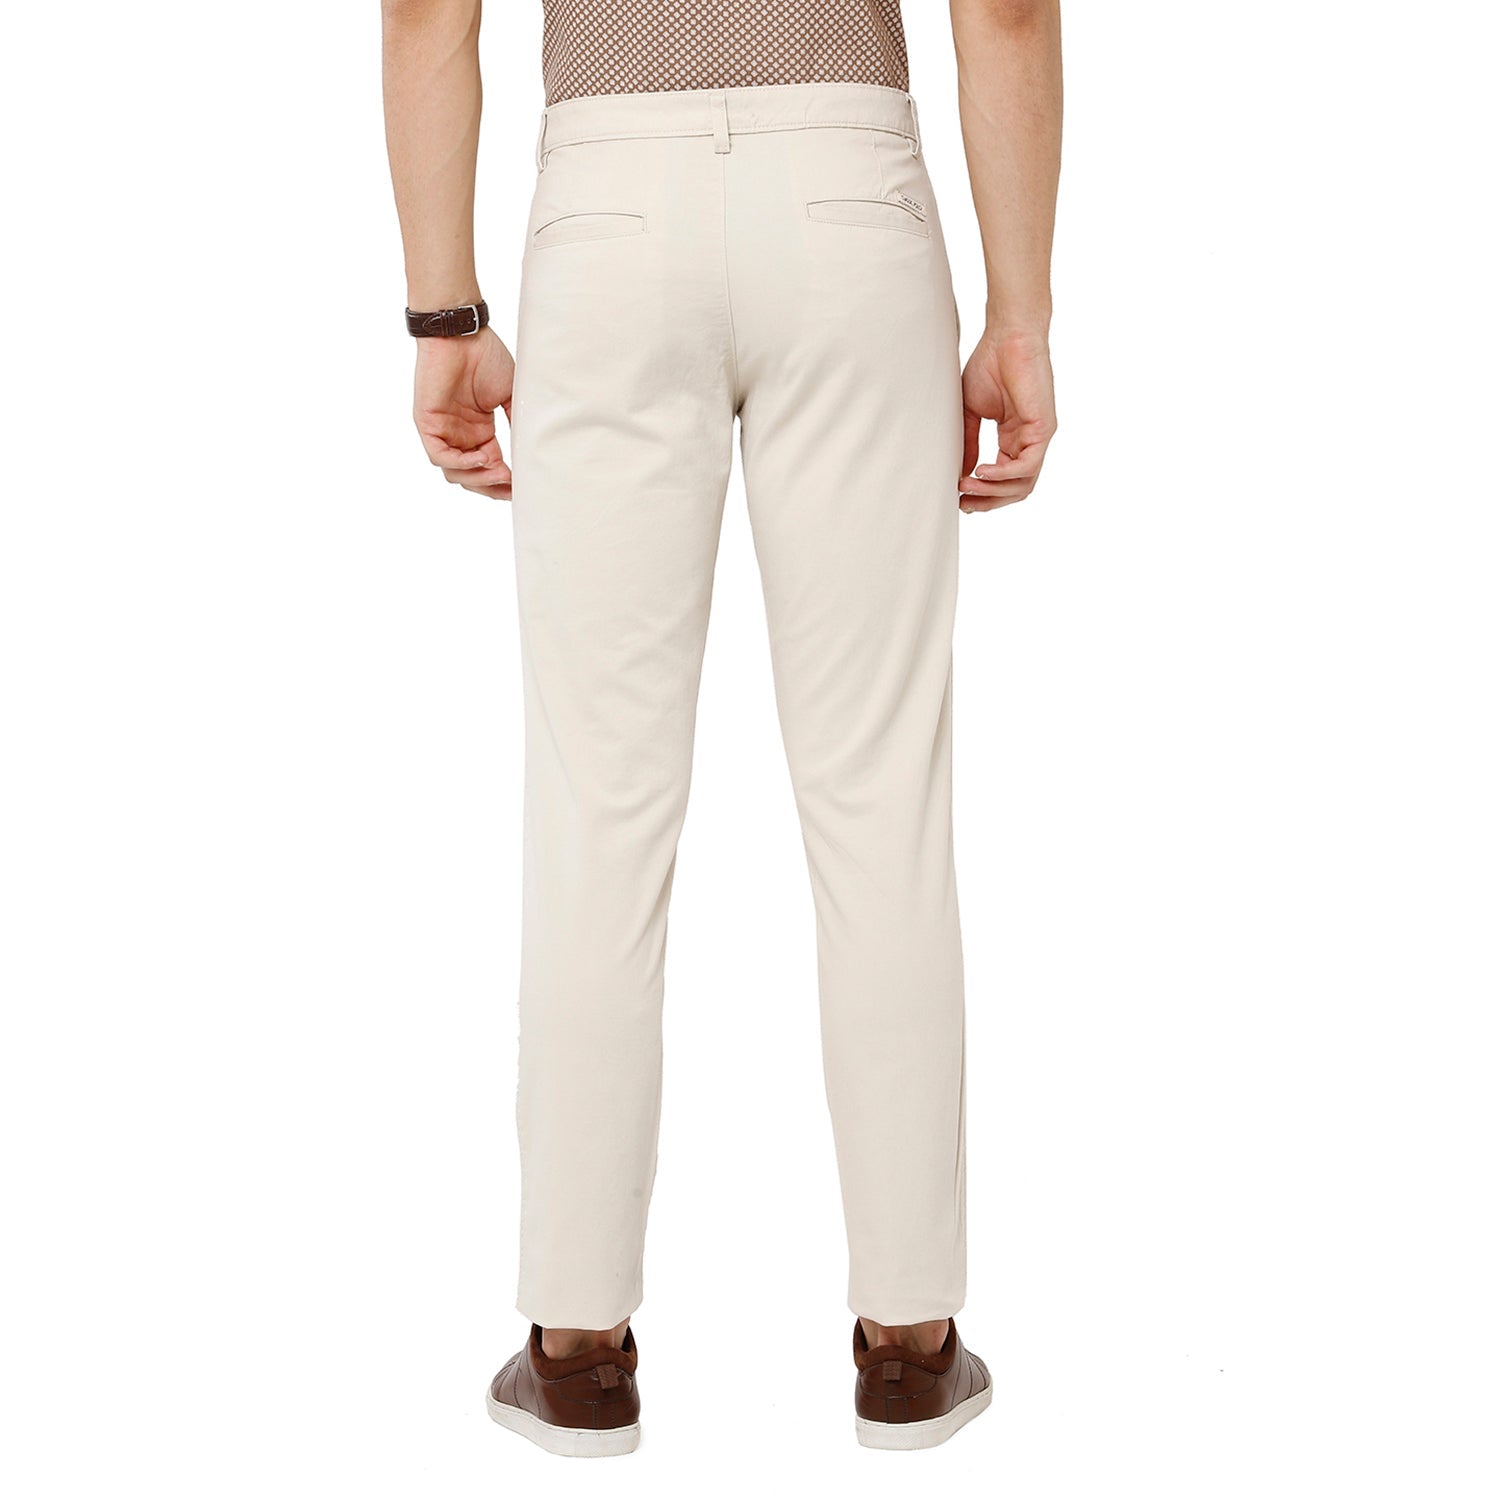 Buy US Polo Association Men's Casual Trousers (8907378963413_USTR6518_42W x  34L_Ivory) at Amazon.in